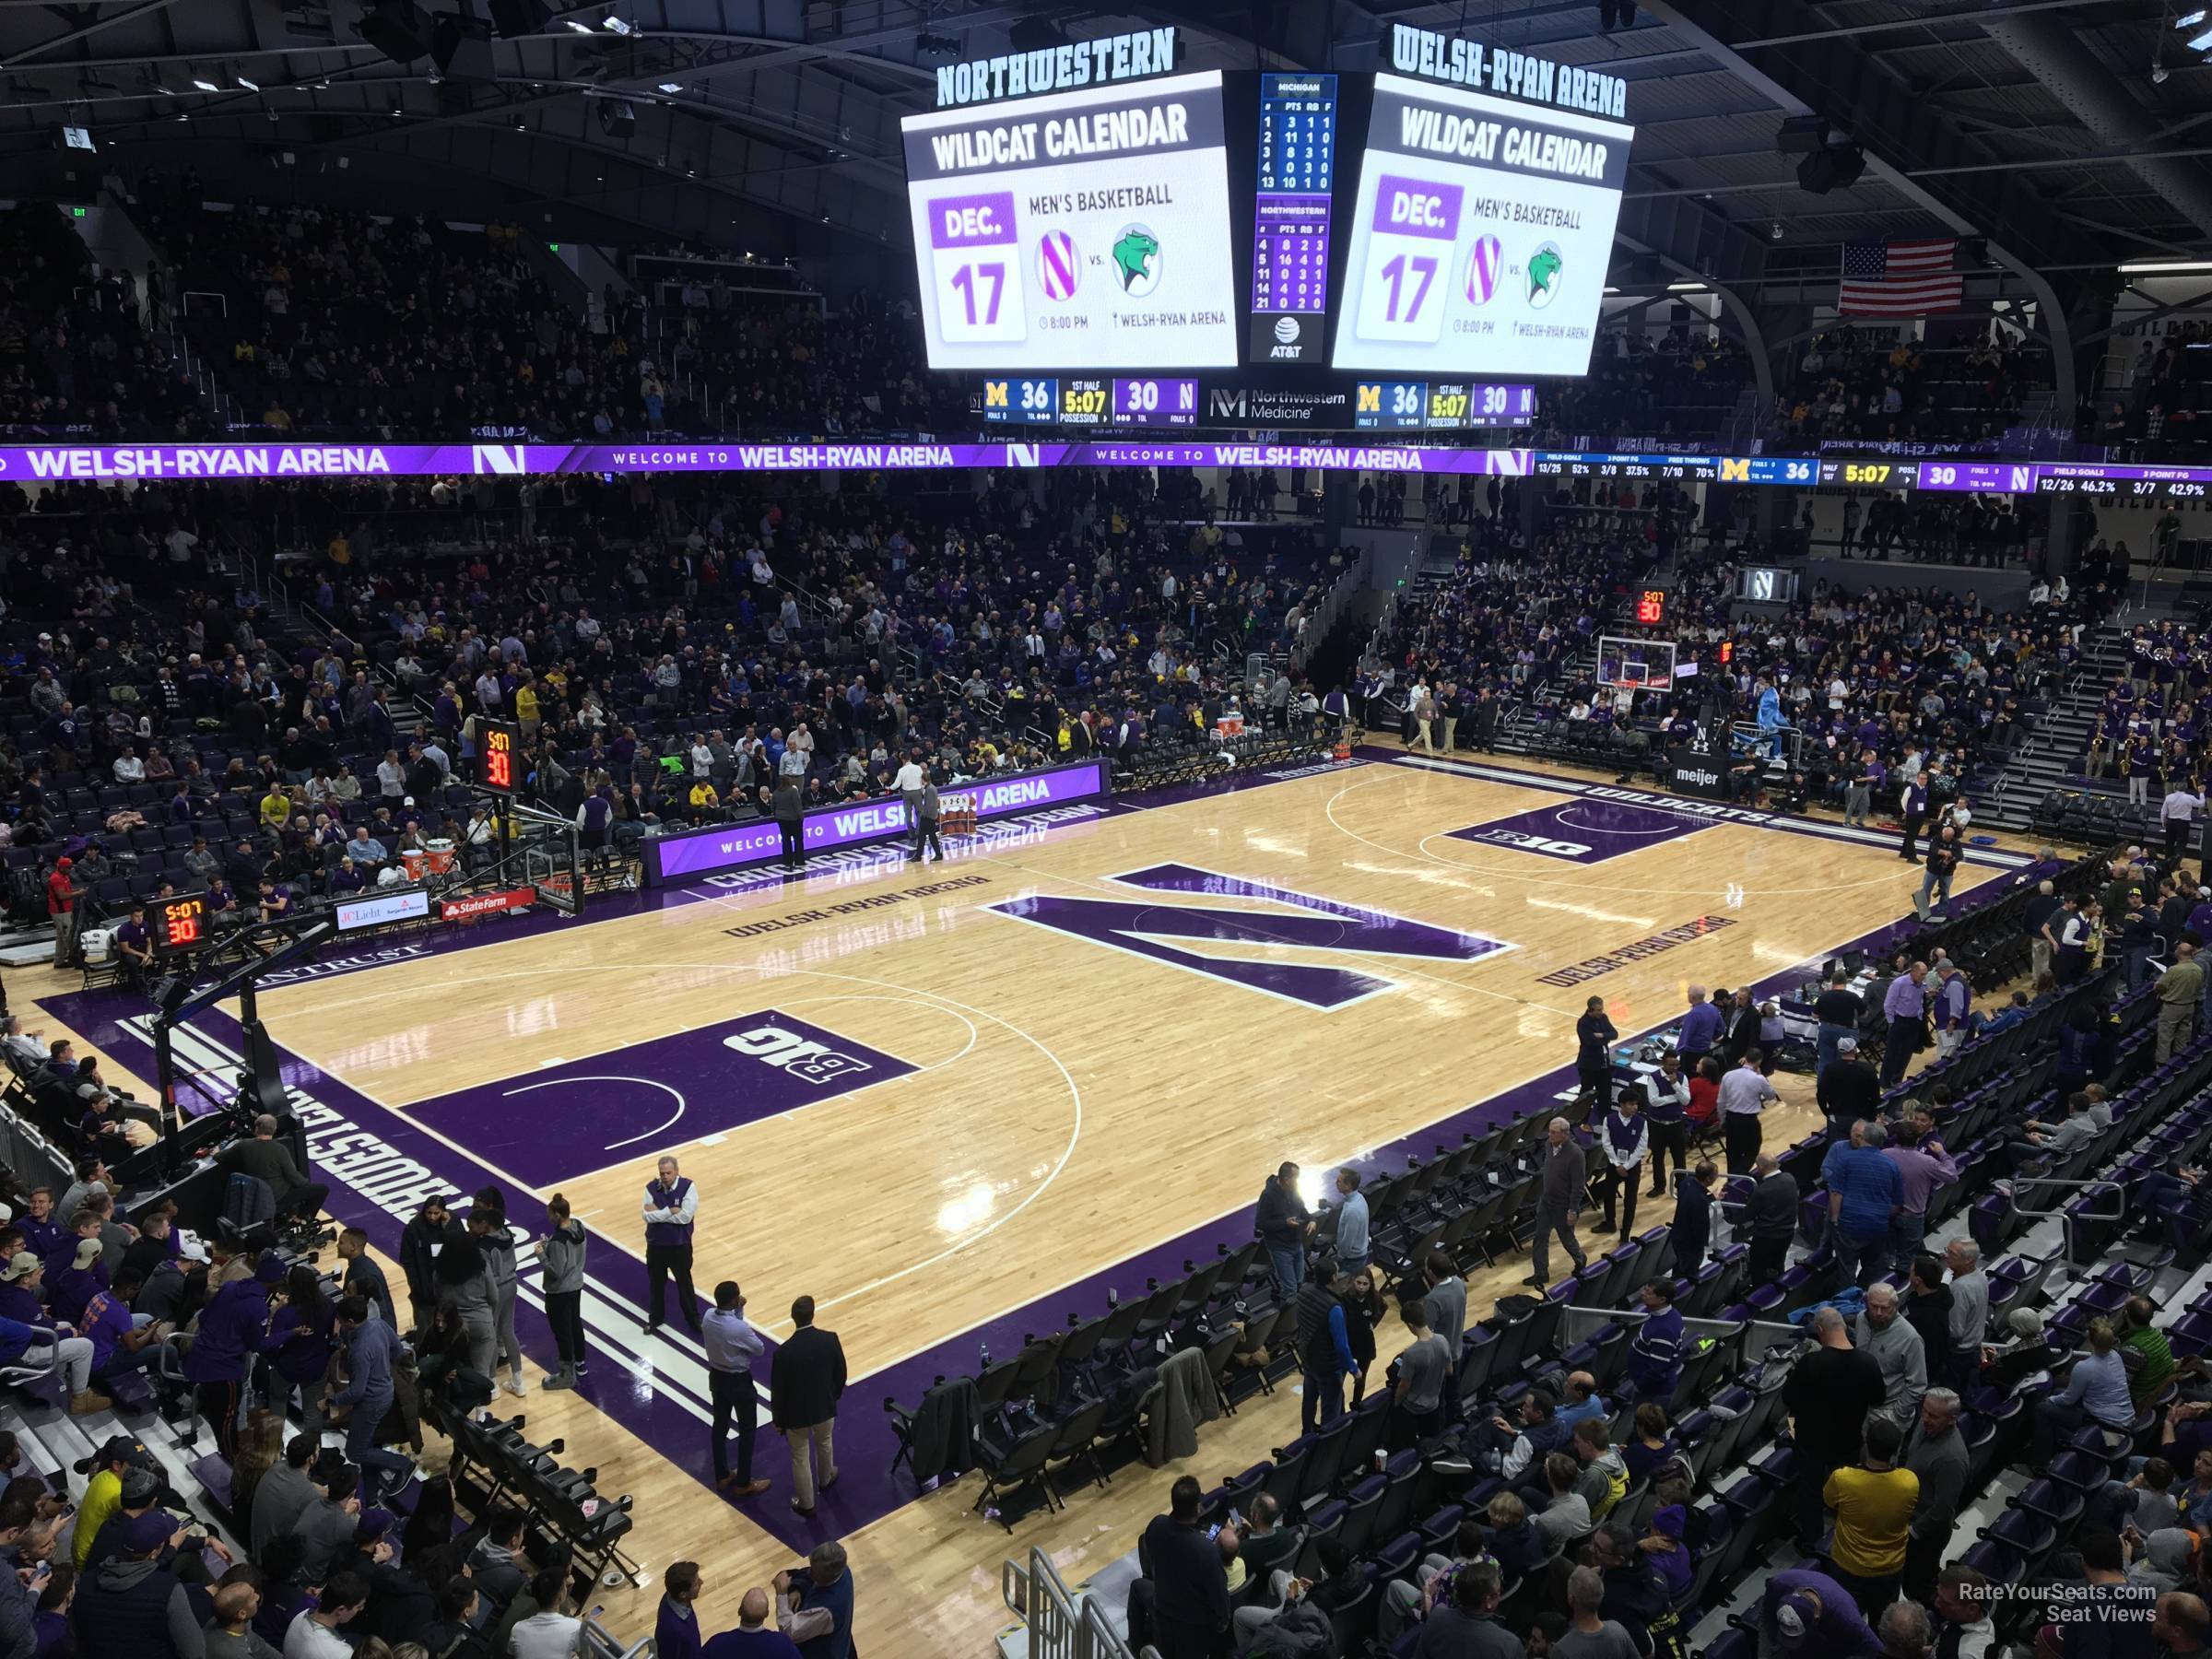 section 201, row 1 seat view  - welsh-ryan arena